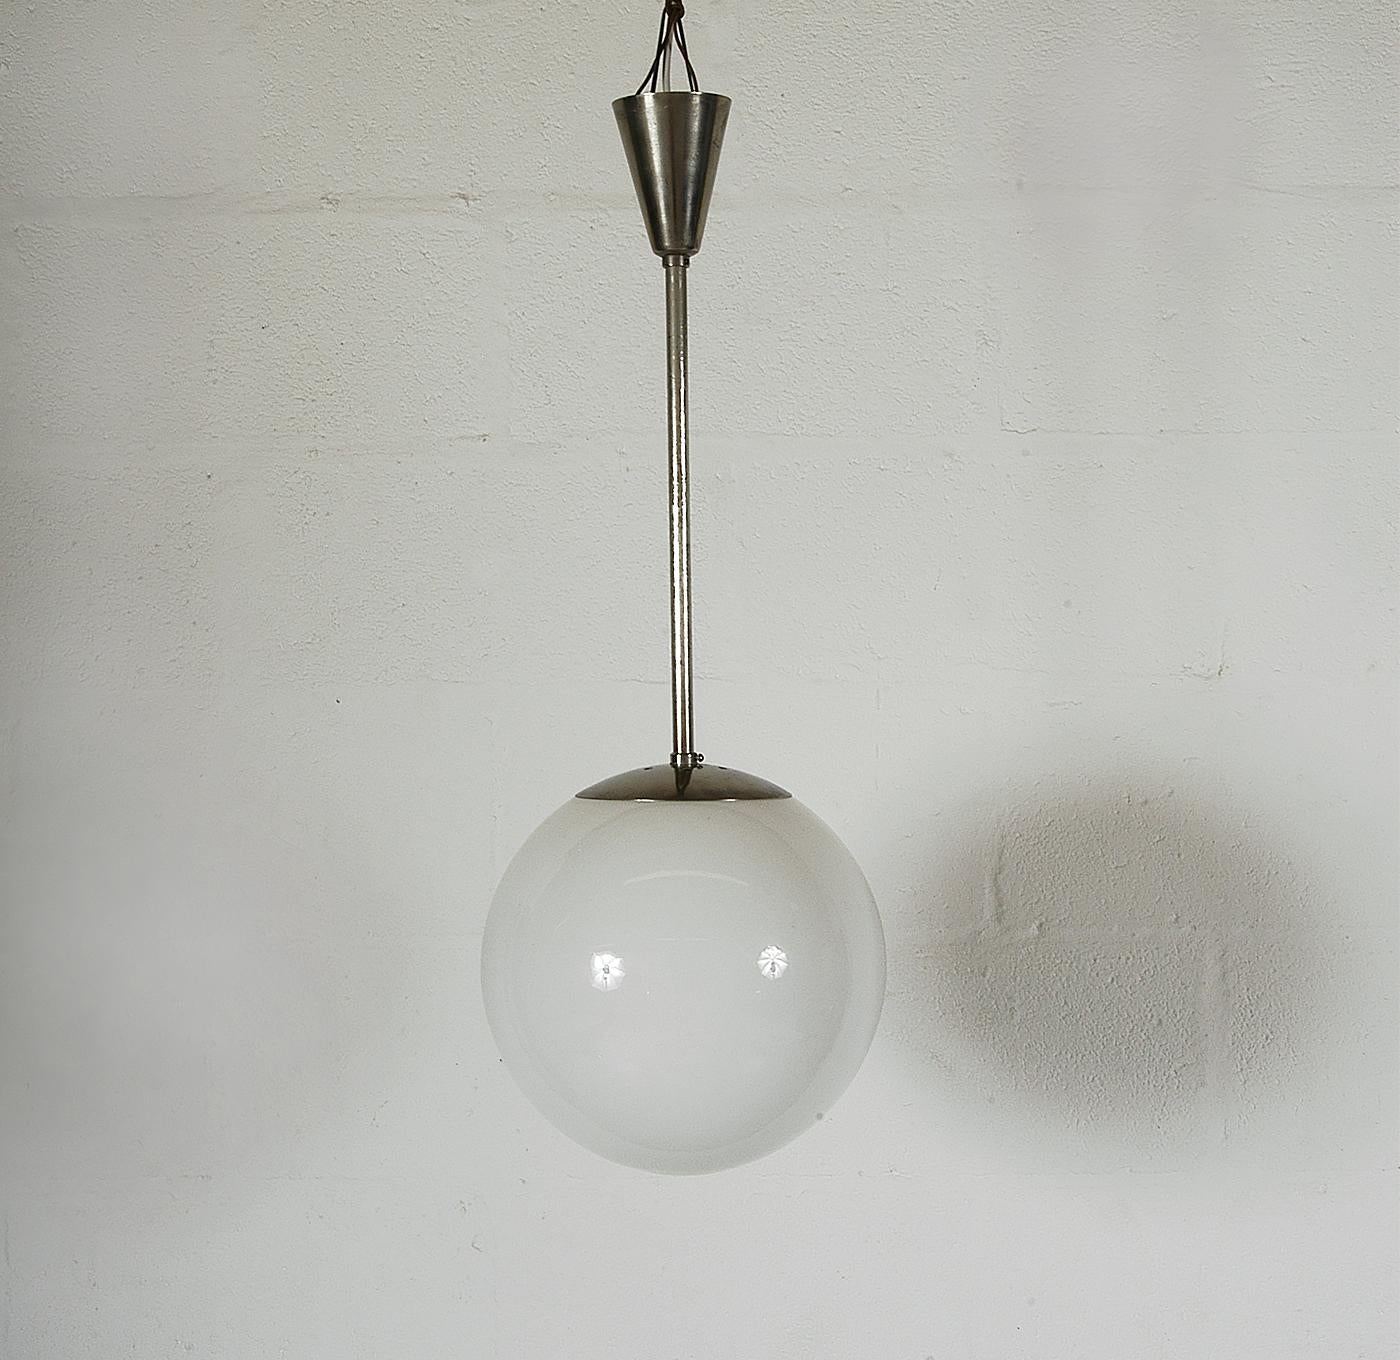 This classic 1930s chrome and opaque glass ceiling light is an iconic Bauhaus / Modernist light - the Ultralux U14 - designed by English designer, A.B Read for Troughton & Young (Lighting) Ltd of Knightsbridge, London. Comprising of an original